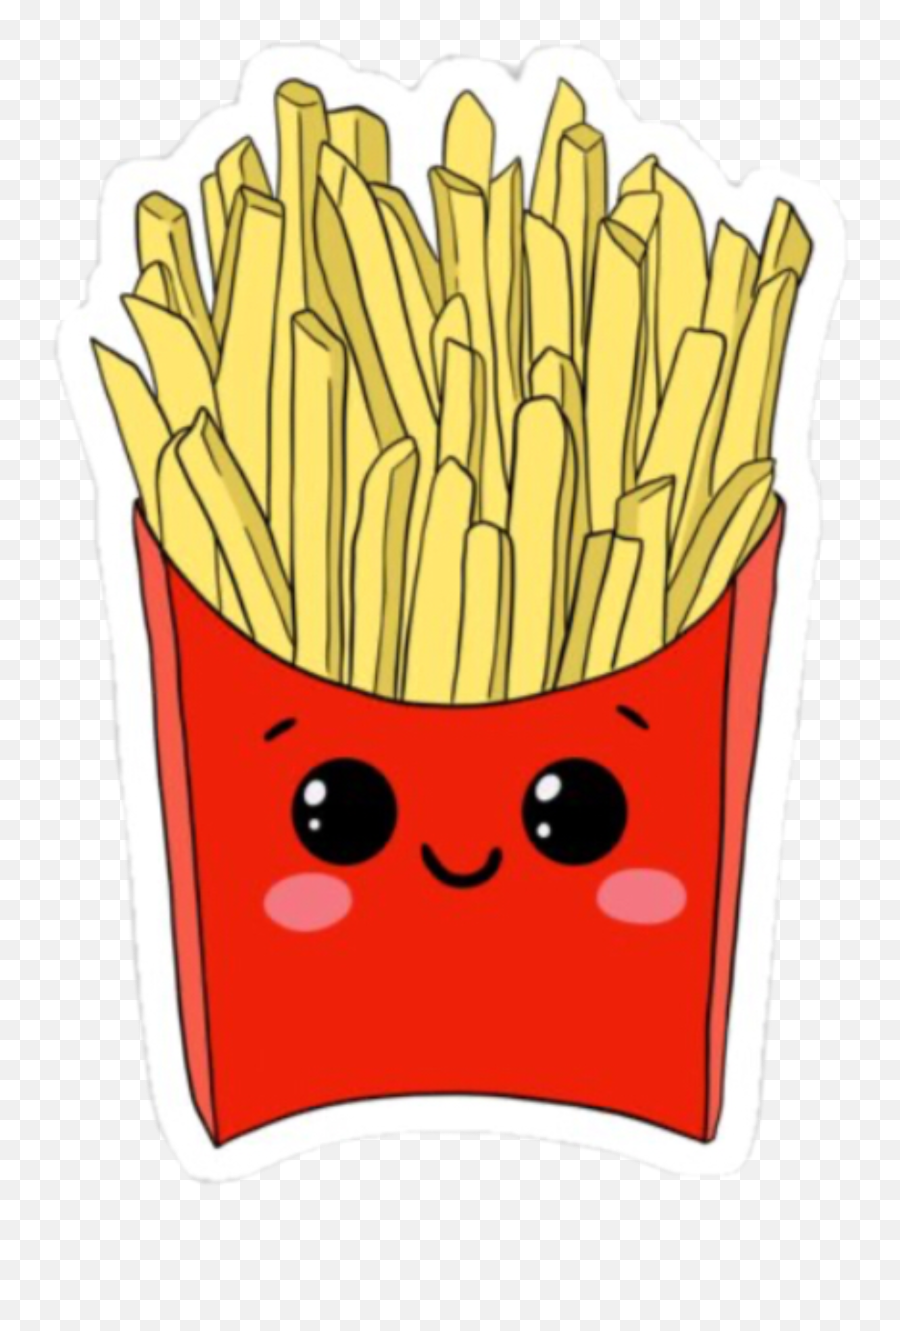 Largest Collection Of Free - Toedit French Fries Stickers Kawaii French Fries Emoji,French Fry Emoji